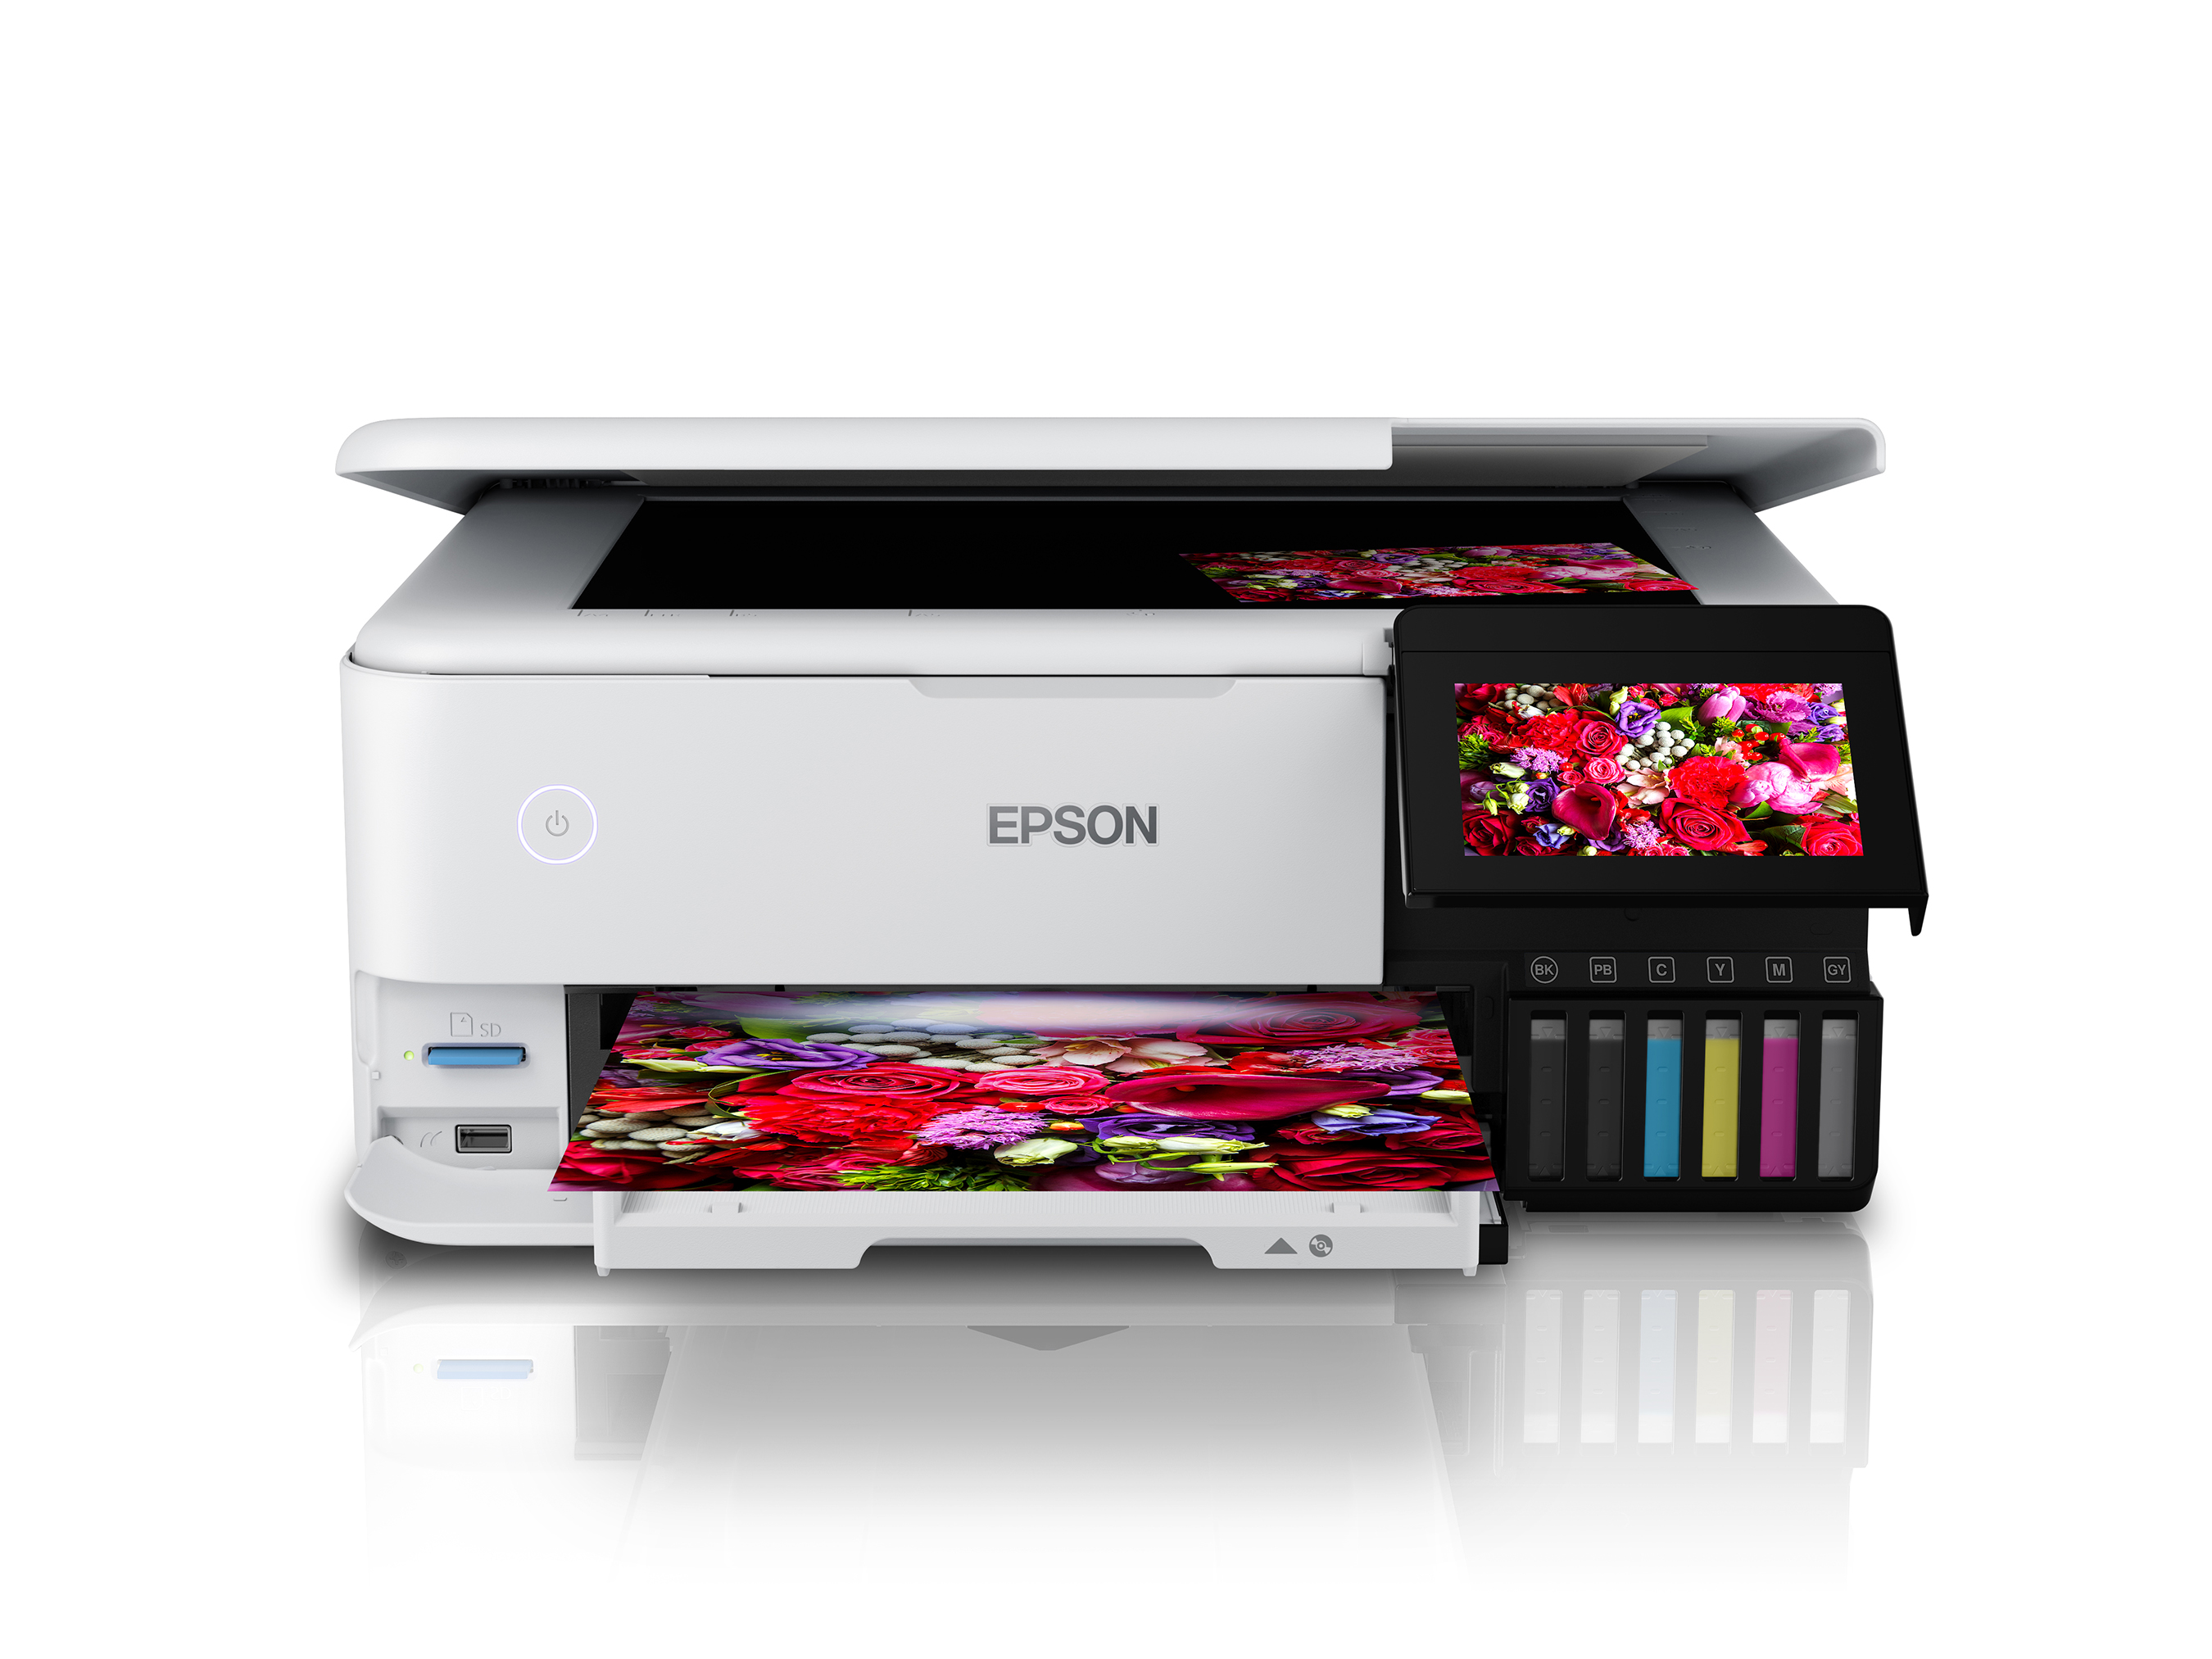 Making any image come to life, the EcoTank Photo ET-8500 all-in-one Supertank printer can print borderless photos up to 8.5" x 11".